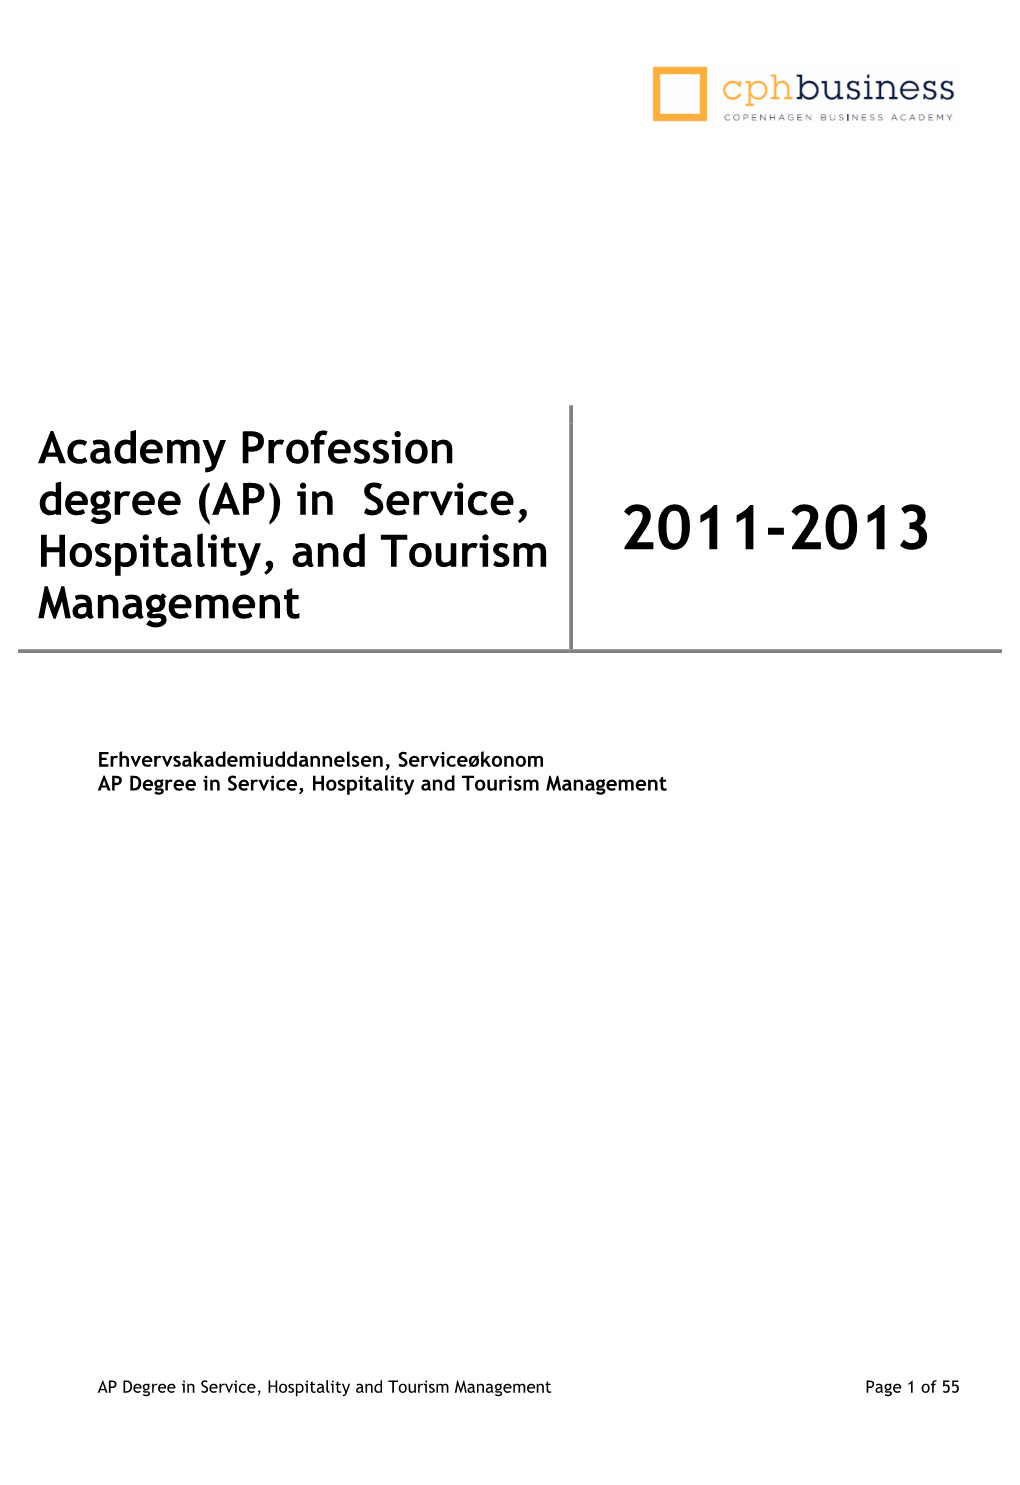 (AP) in Service, Hospitality, and Tourism Management